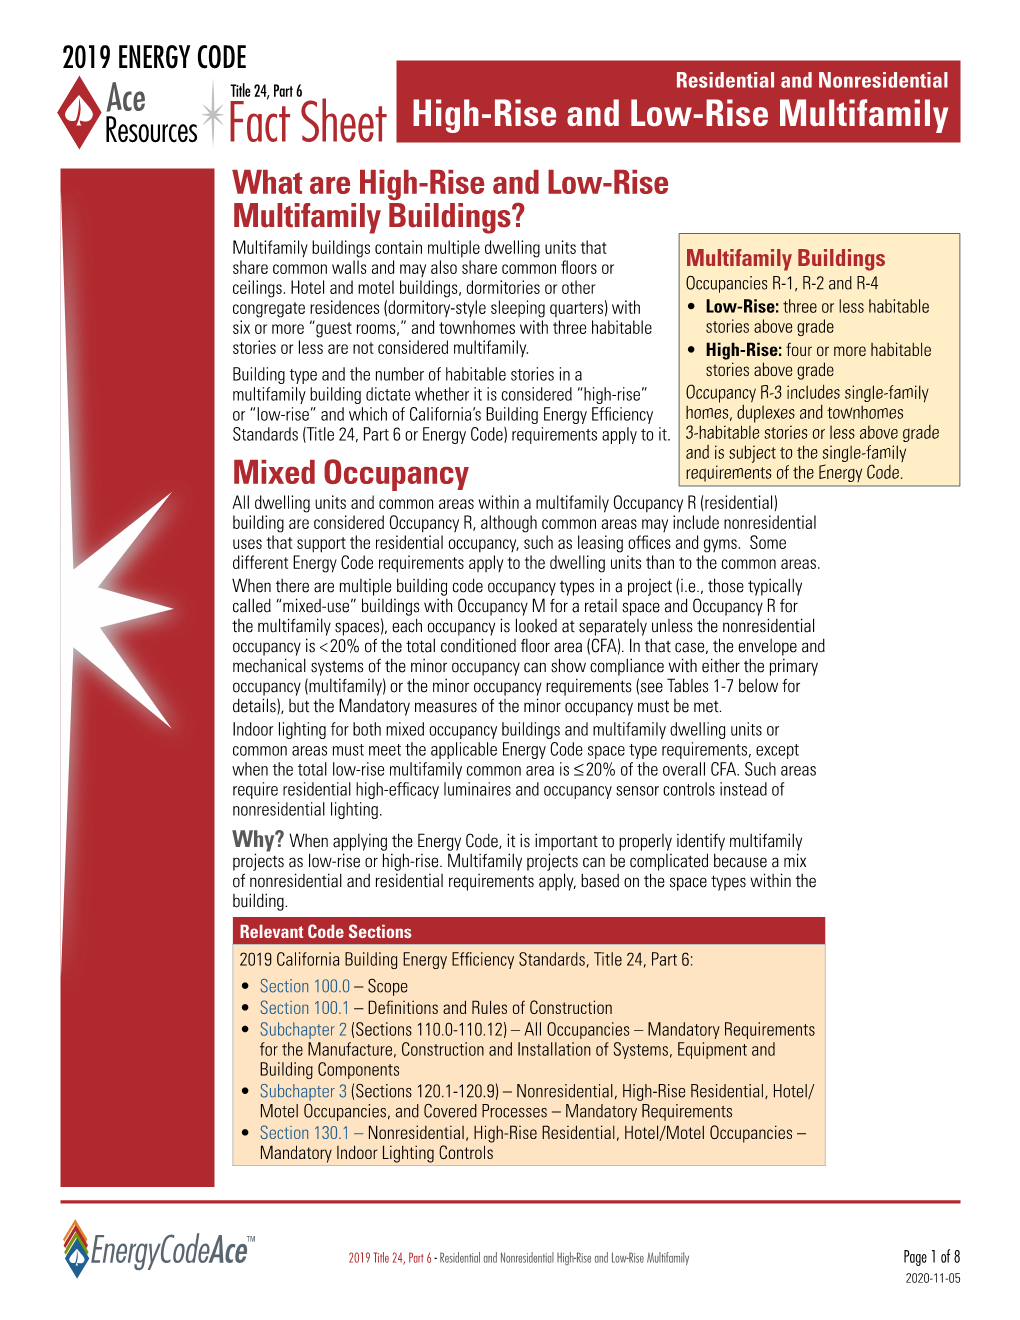 Fact Sheet: High-Rise and Low-Rise Multifamily 2019